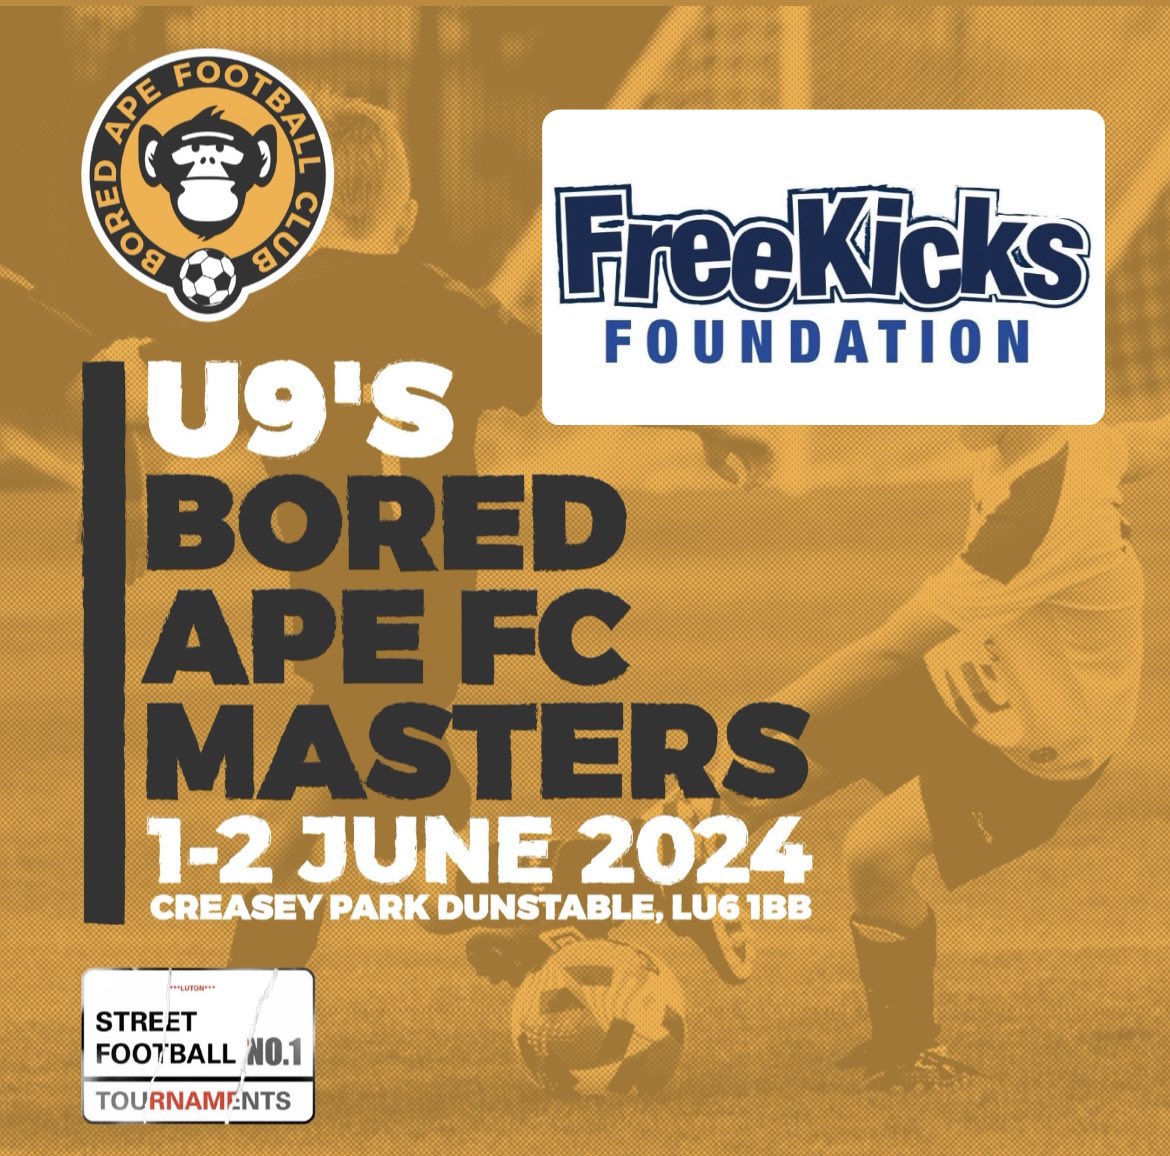 🏆BAFC MASTERS🏆 In case you missed it, we’re teaming up with @FreeKicks for this years BAFC Masters! 🧡 Join us and @SFTLuton for all the fun on 1st and 2nd June in Dunstable ⚽️ #NFT #XRPGiveaway #BAFC #GOAT #XRP #XRPL #XRPNFT #NftGiveaway #NFTArt #APE #DAO #metaverse #Web3